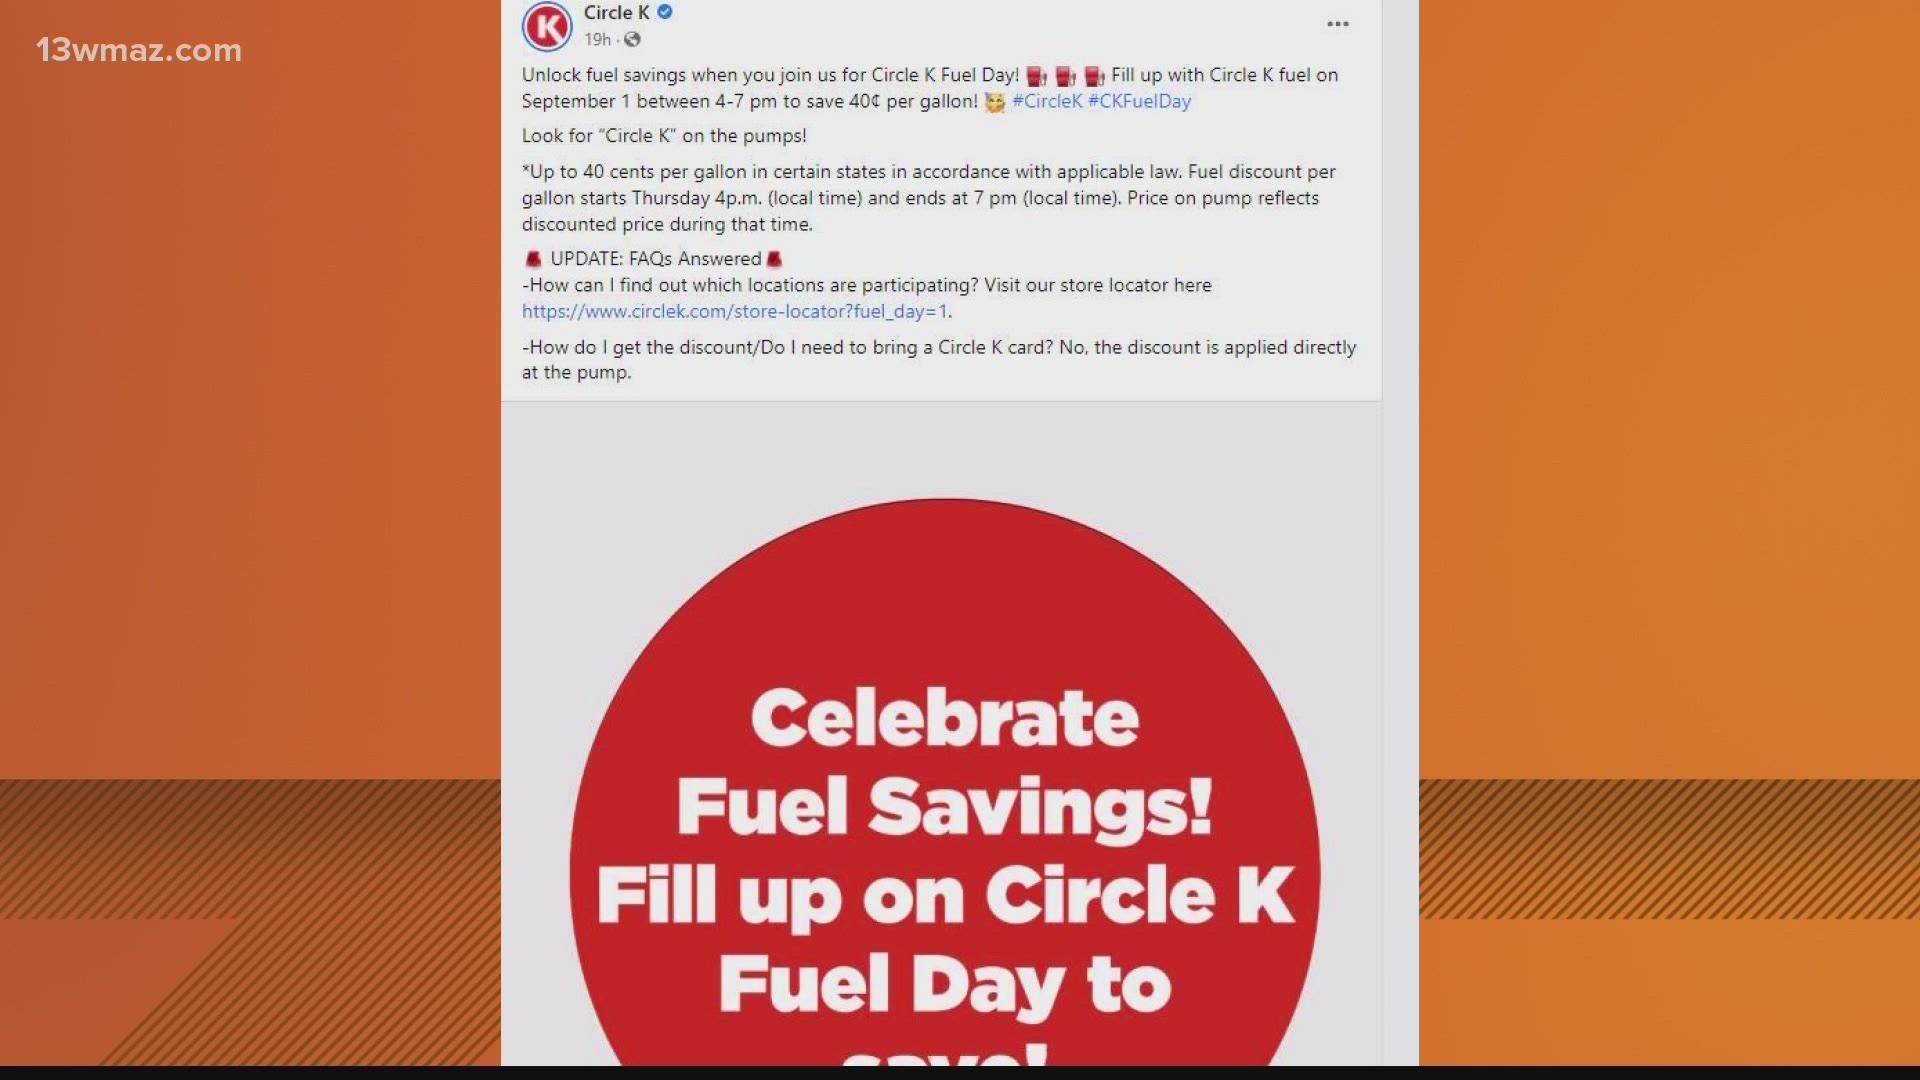 On September 1, Circle K is offering savings of 40 cents off per gallon, between 4 - 7 p.m.